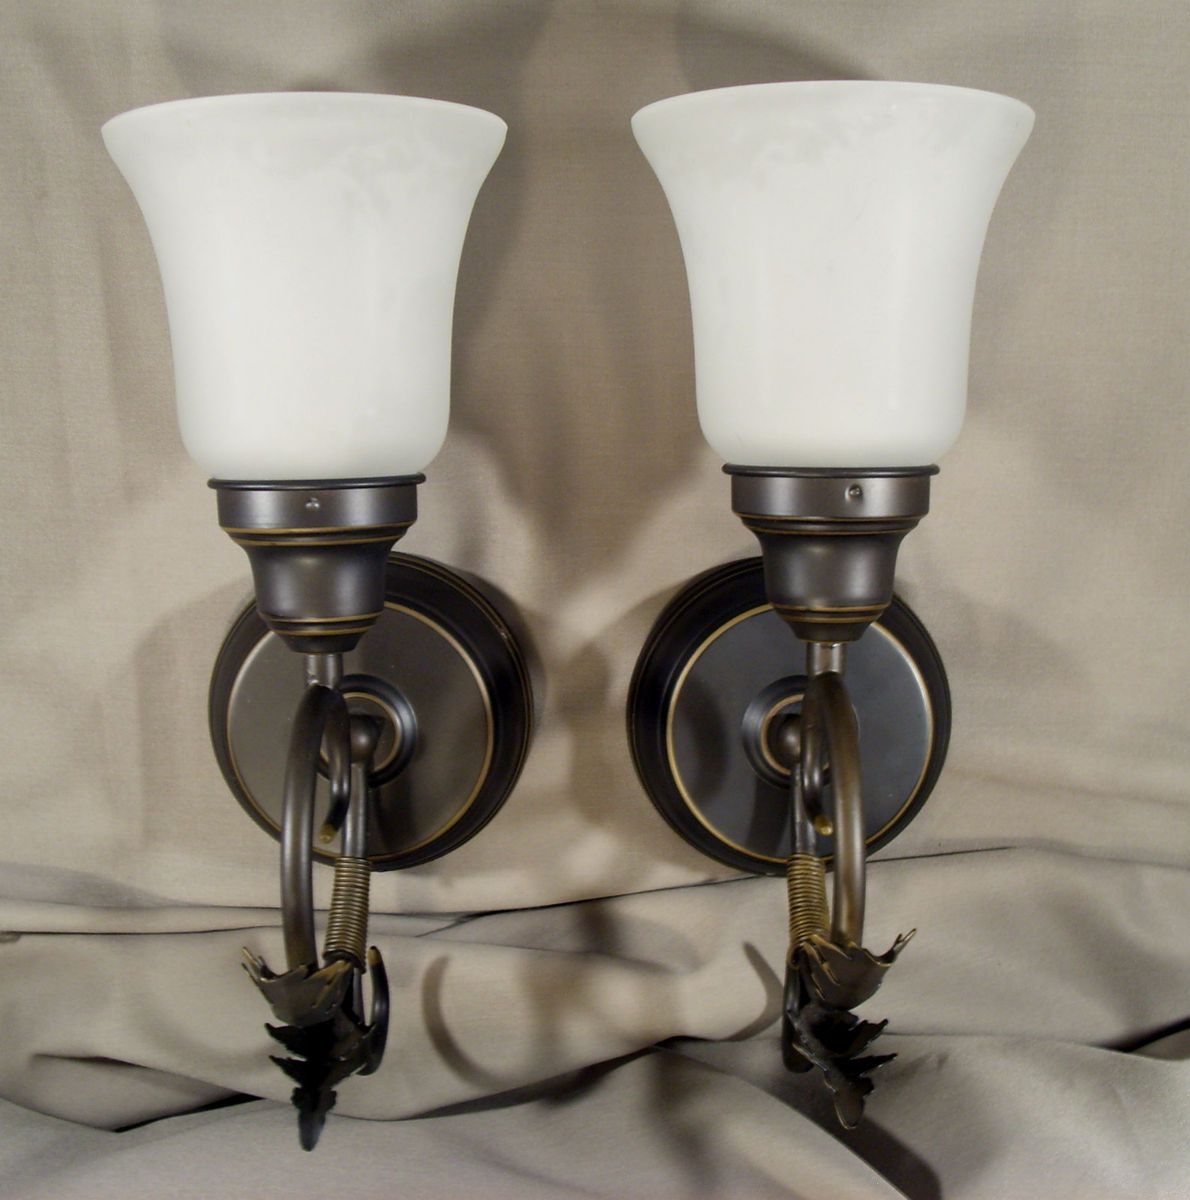   Wall Sconces w/Glass Shades, Candle Lights, Battery Operated 450hr